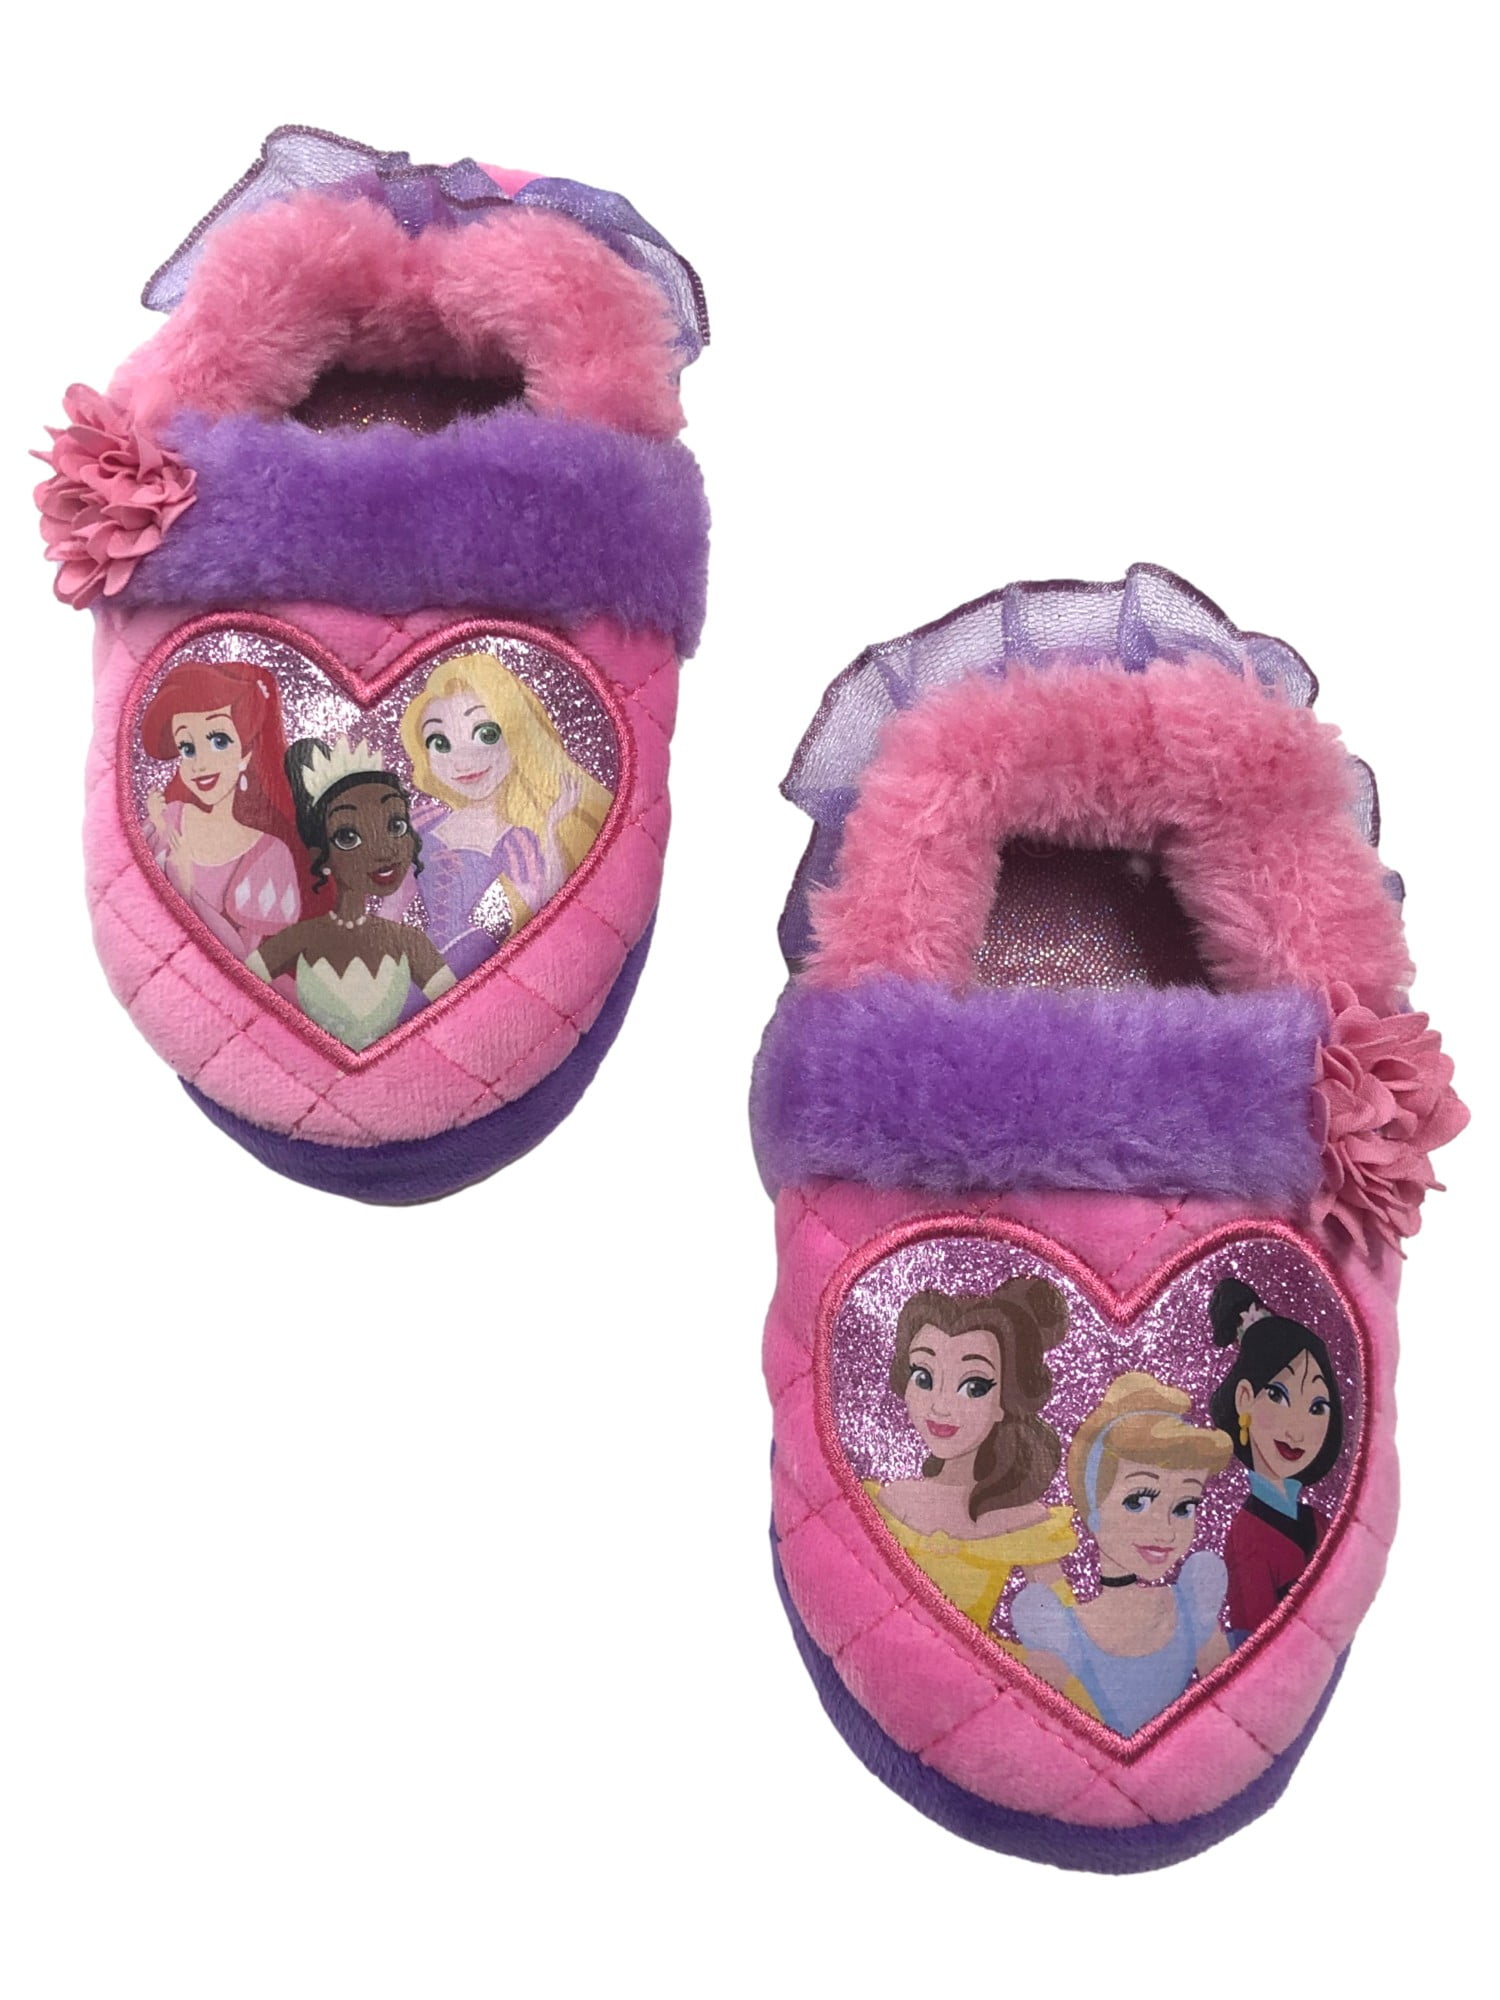 Disney Princess Slippers Girls Small Pink Fuzzy Pre-Owned Excellent  Condition for Sale in Landers, CA - OfferUp